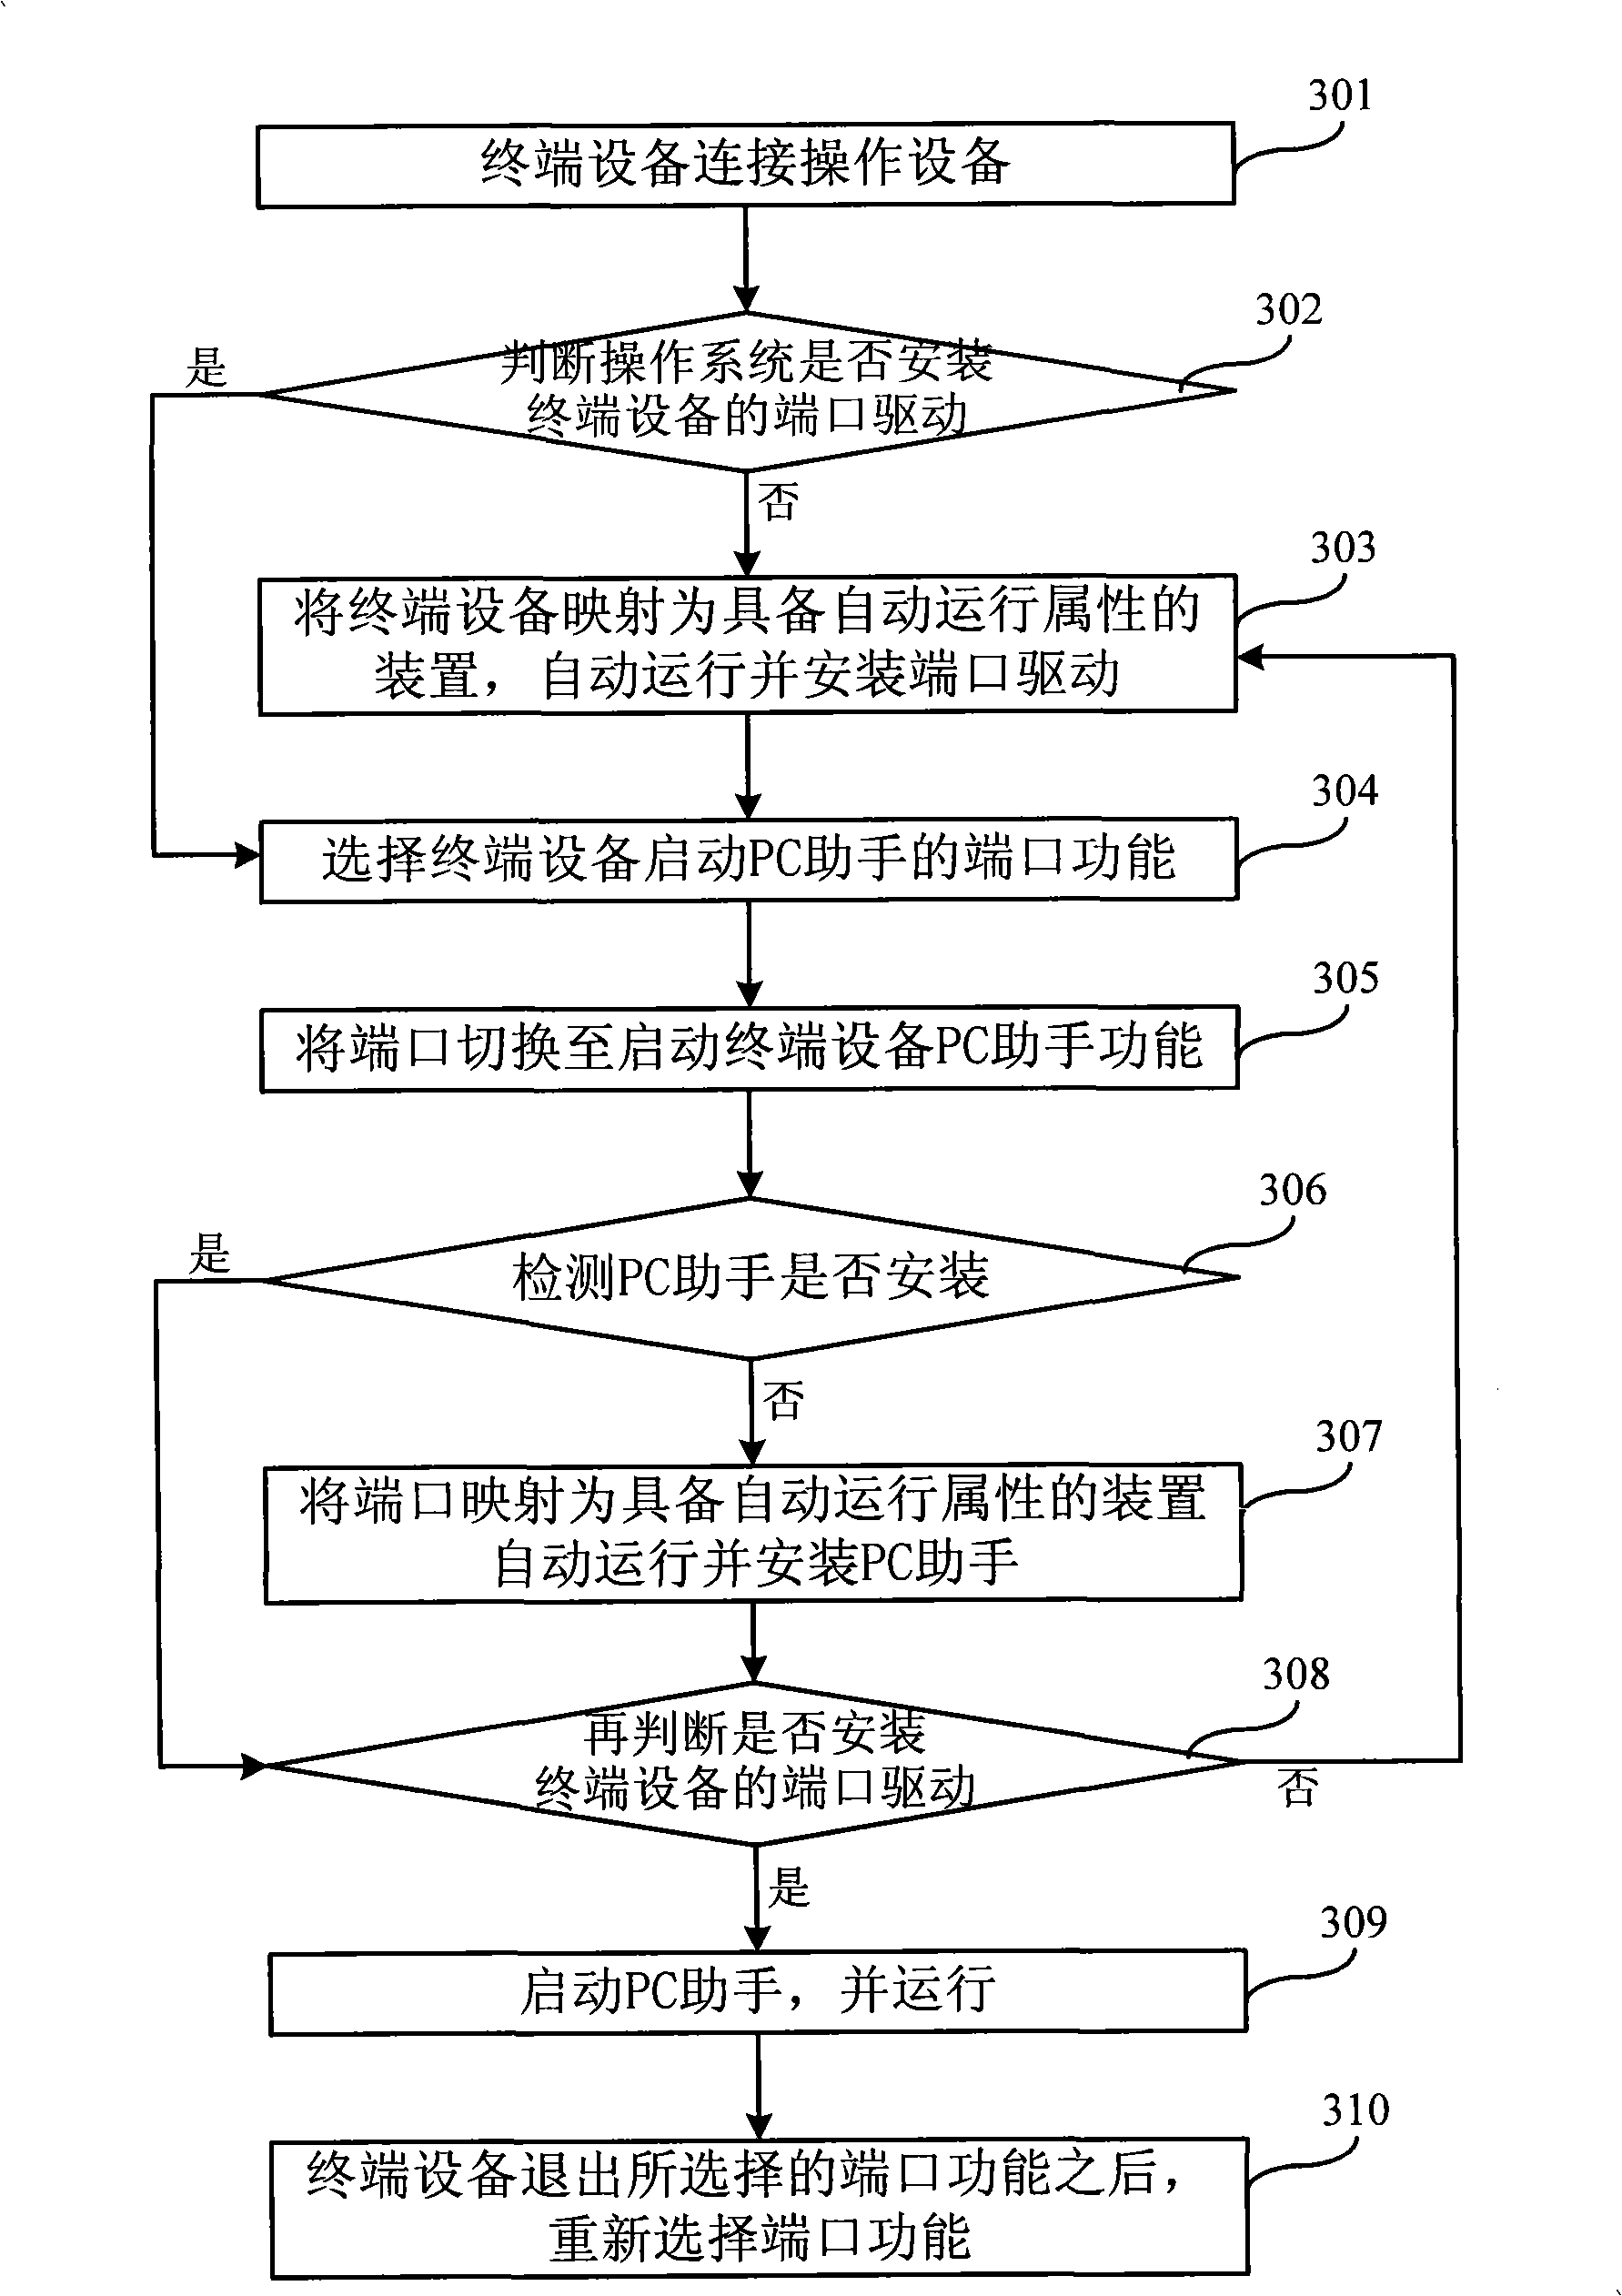 Method and apparatus for automatic switching port of terminal apparatus, and automatic switching system